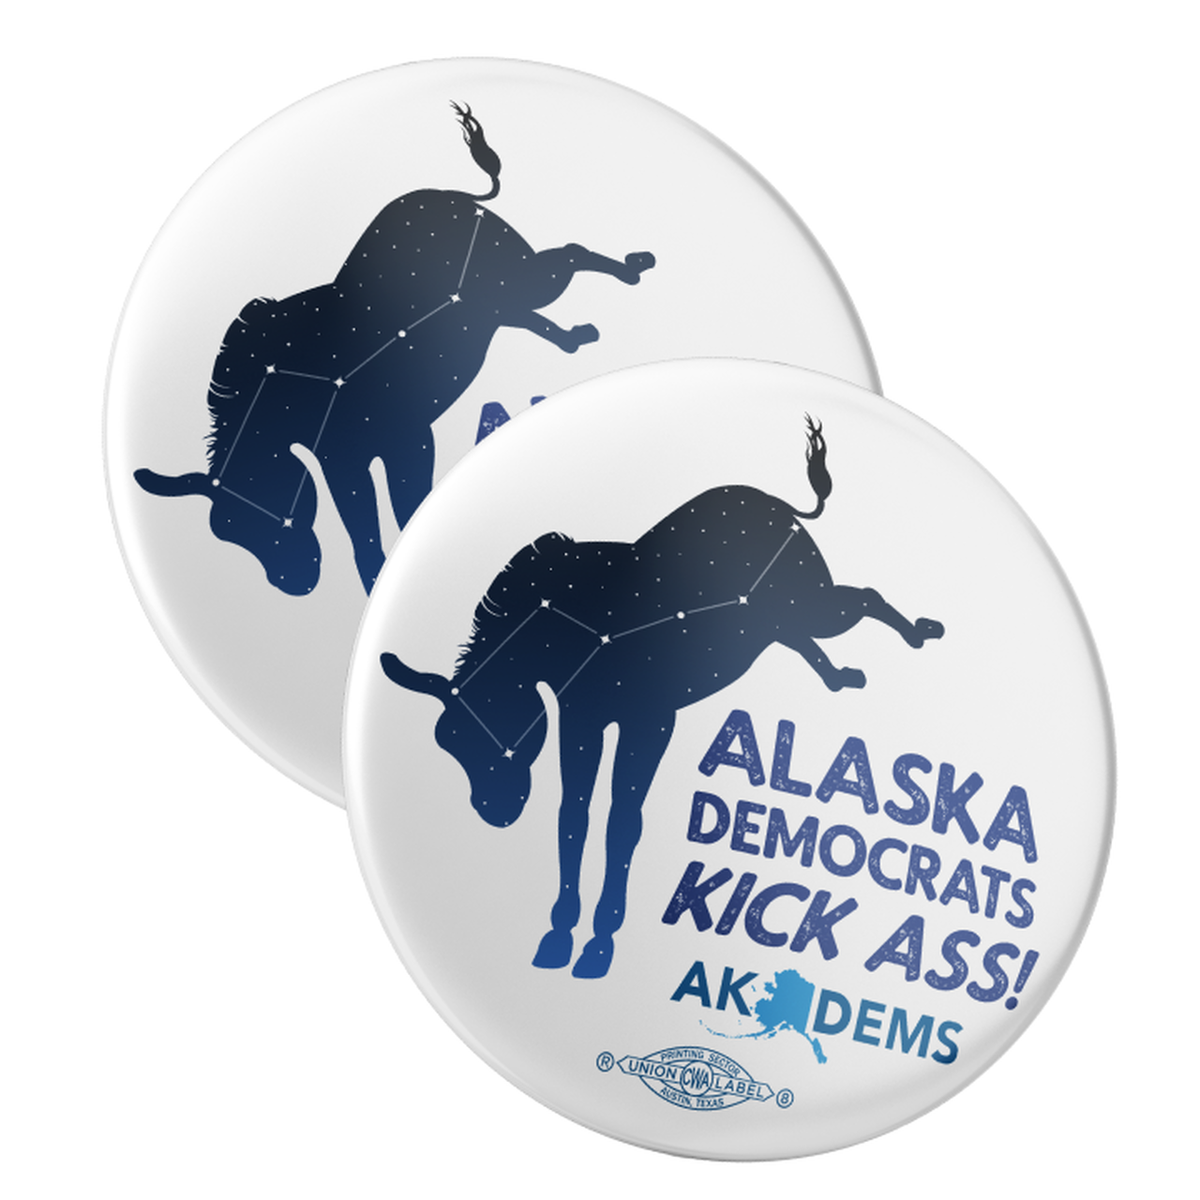 I really like both of these  @AlaskaDemocrats buttons. https://store.alaskademocrats.org/alaska-dems-kick-ass-2-25-mylar-button-pack-of-two/ https://store.alaskademocrats.org/what-a-bunch-of-snowflakes-can-do-2-25-mylar-button-pack-of-two/